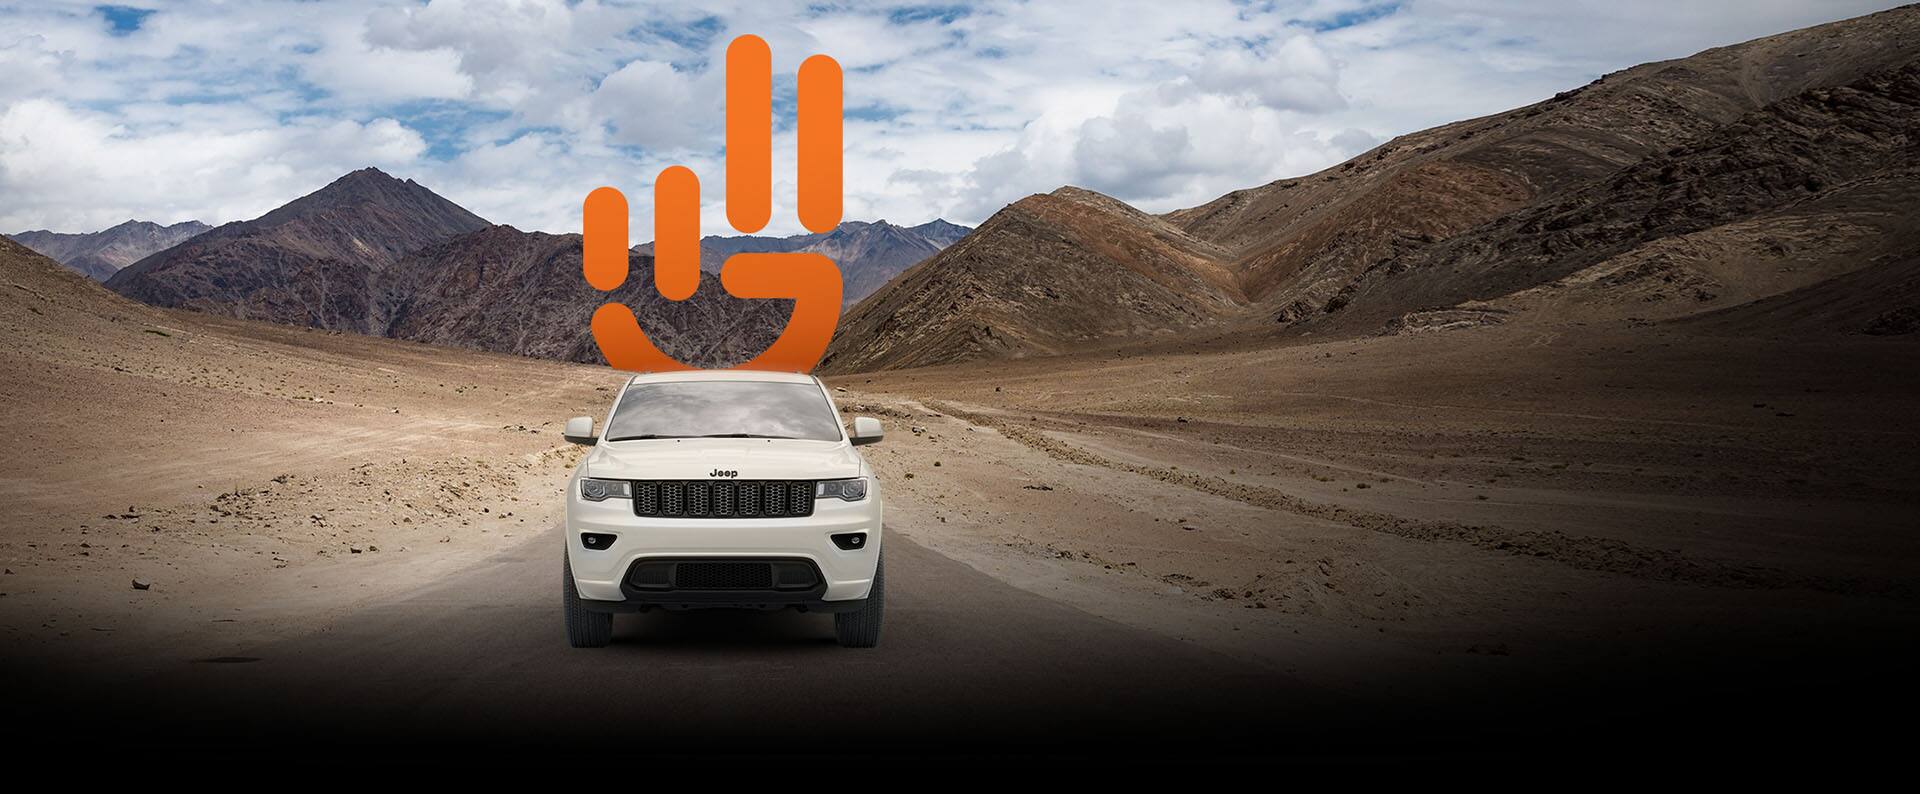 Jeep Wave logo. A 2022 Jeep Grand Cherokee WK Laredo X with the Altitude Appearance Package being driven on a lonely desert road away from the mountains.